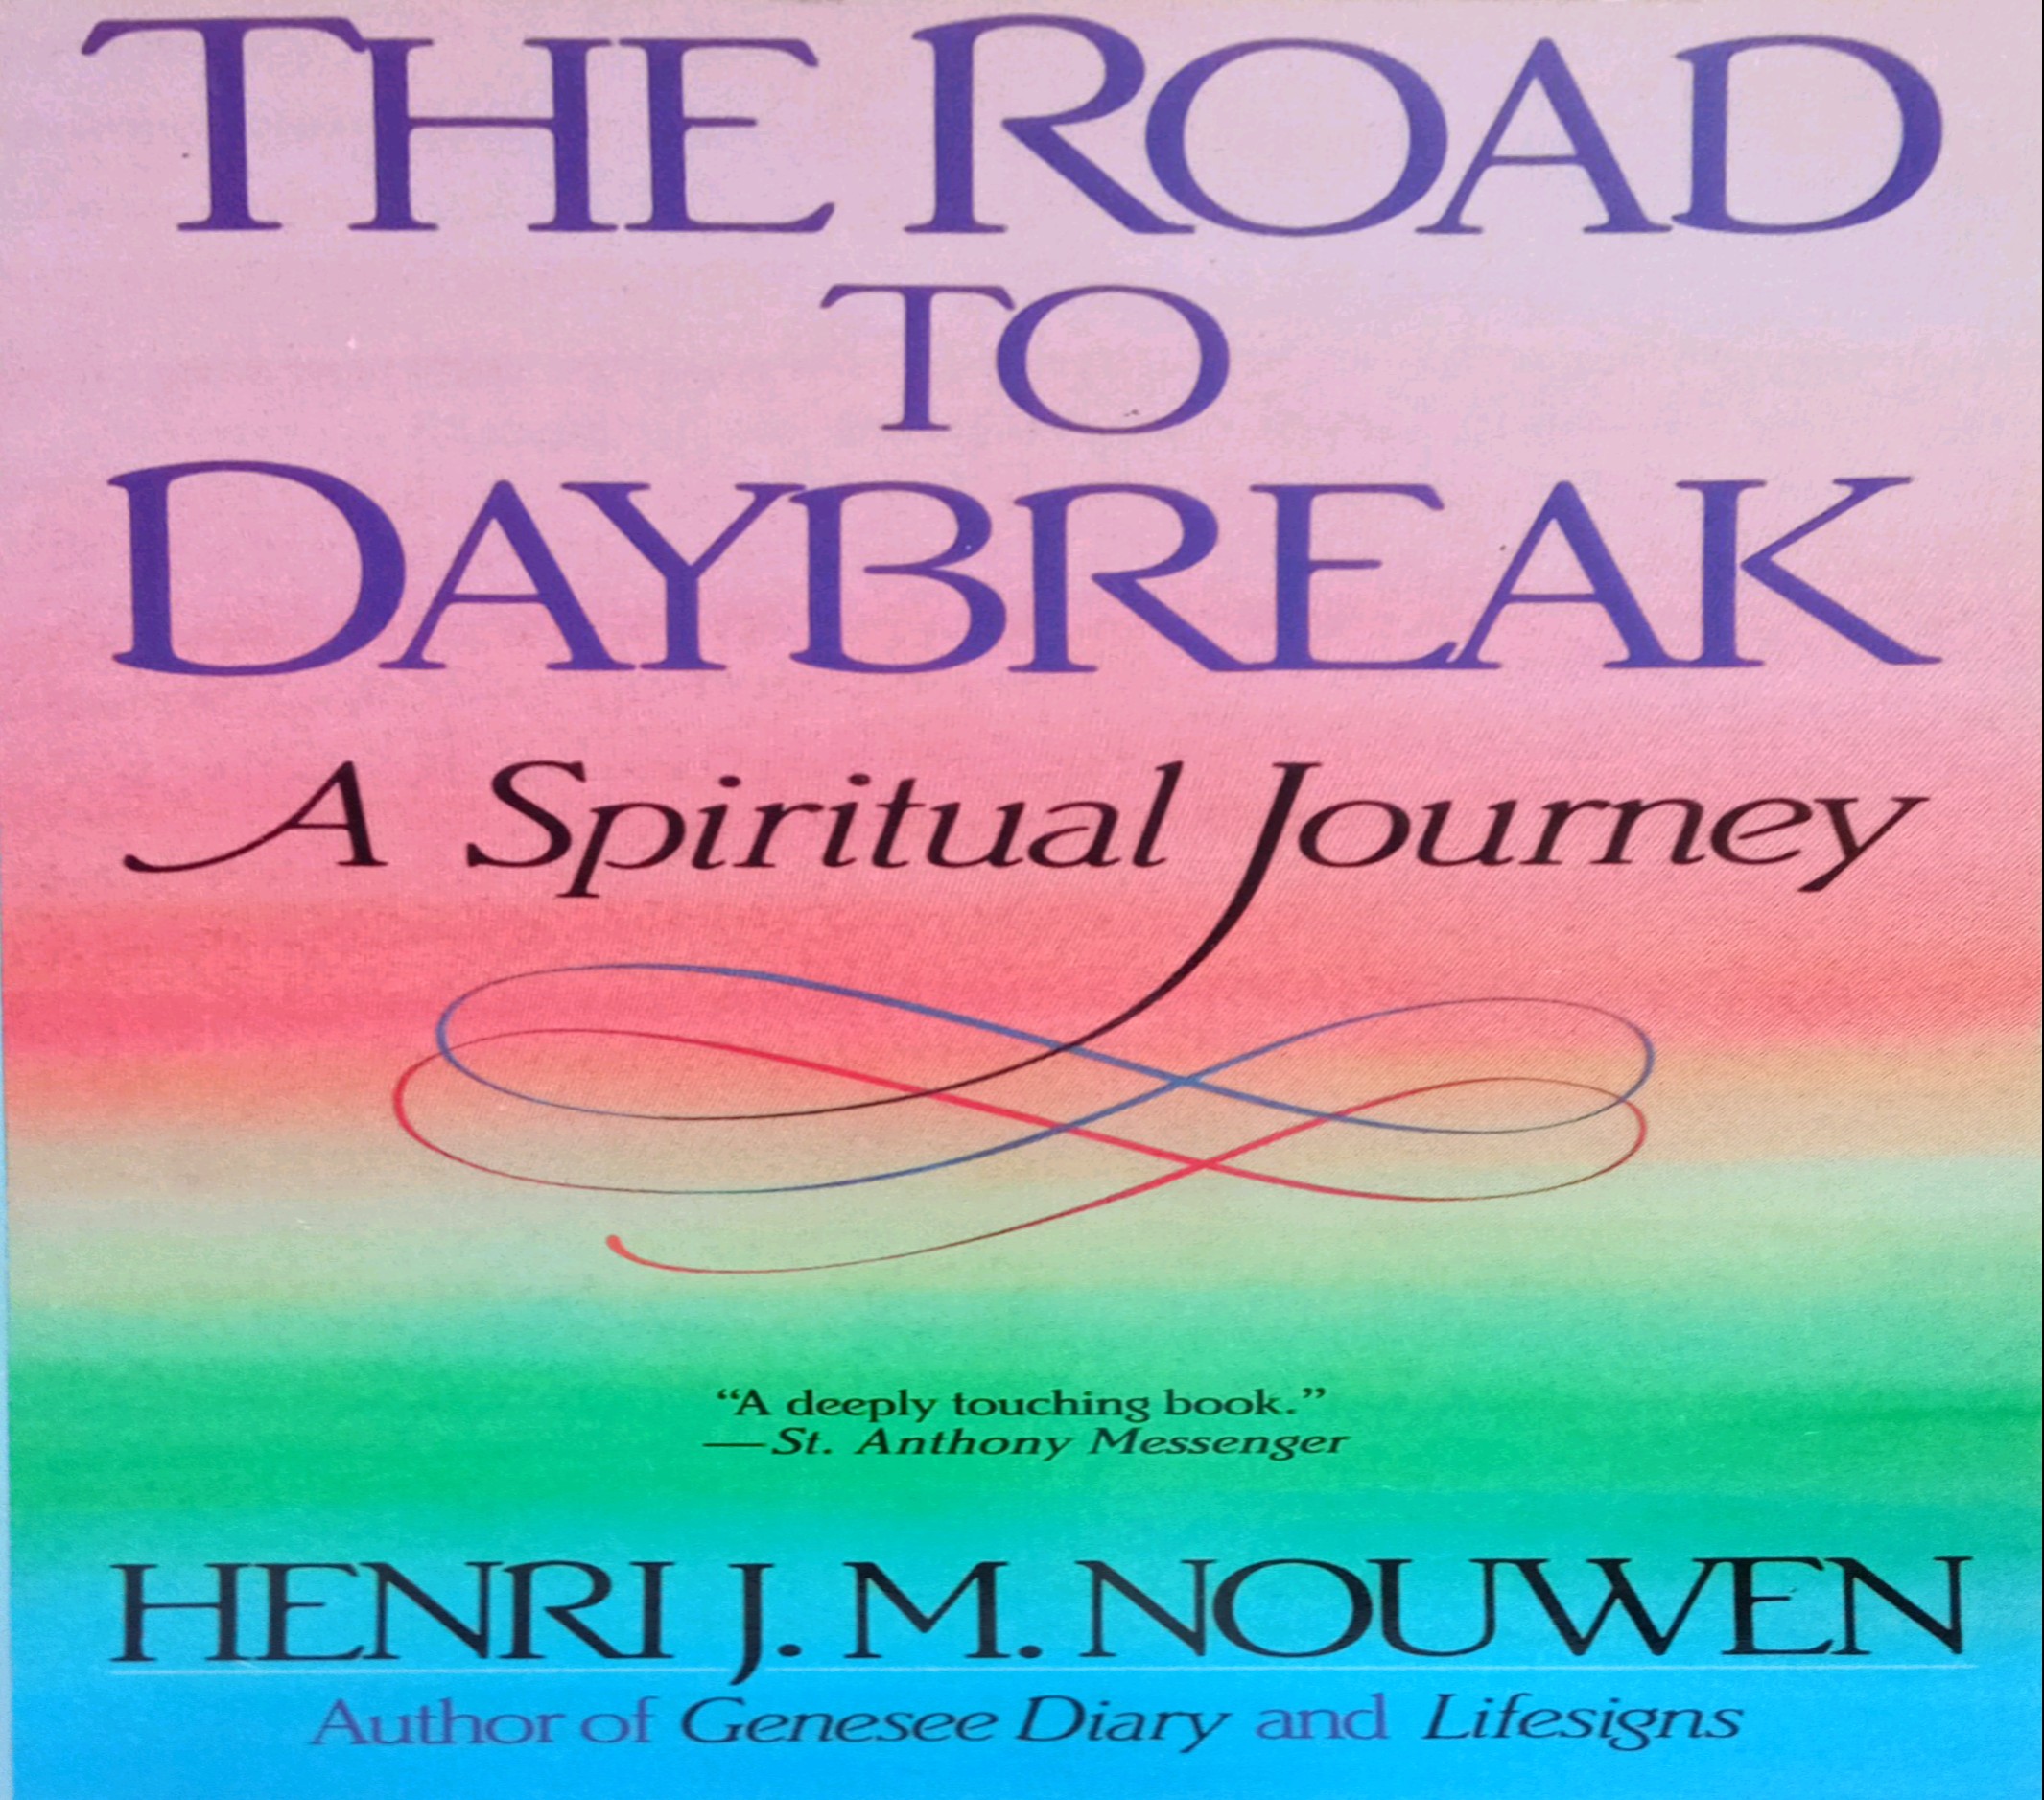 THE ROAD TO DAYBREAK: A SPIRITUAL JOURNEY